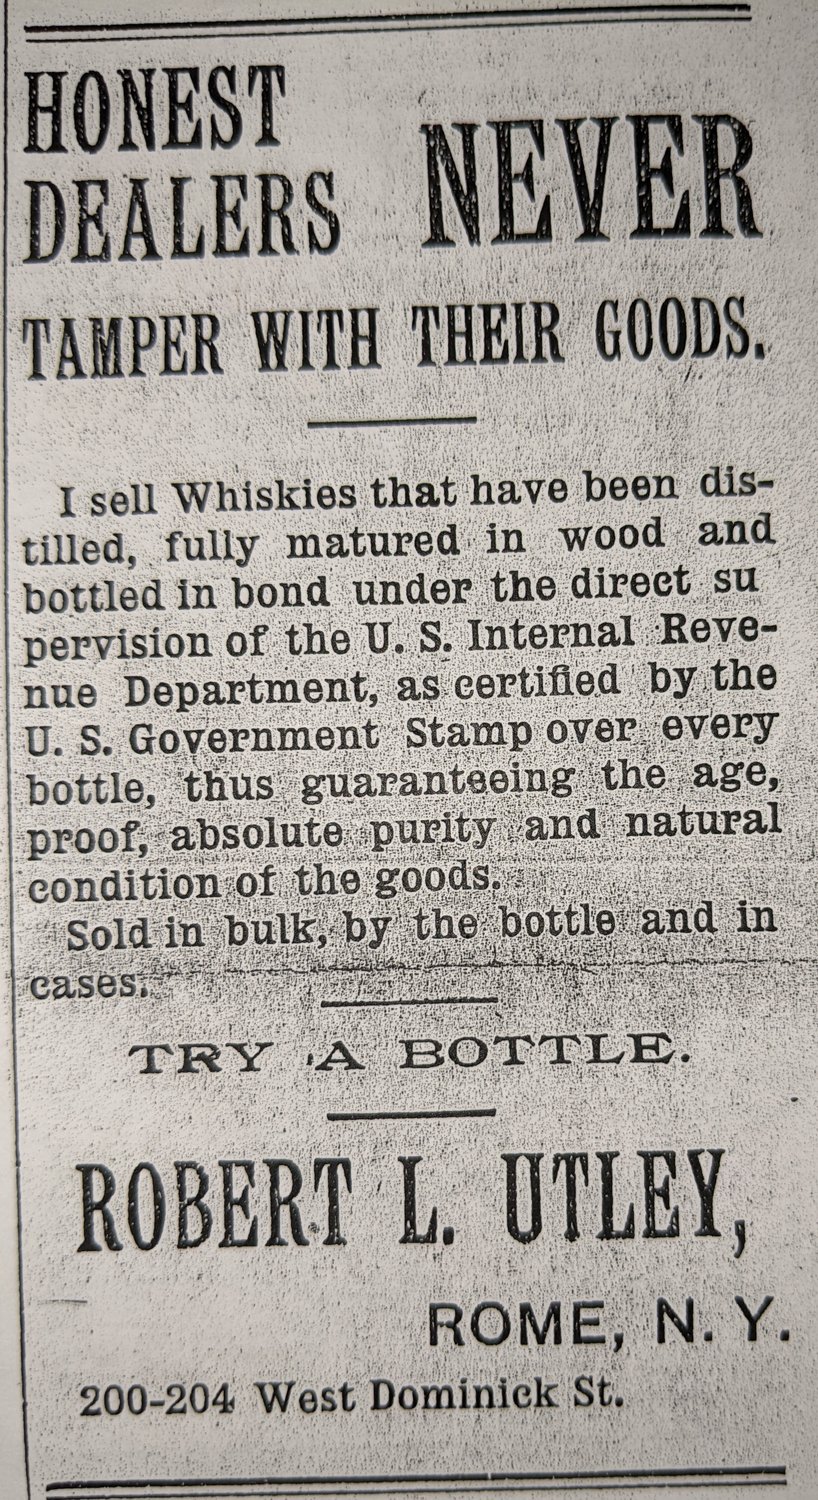 ‘TRY A BOTTLE’ — An 1897 ad for Robert L. Utley’s products assures buyers that “Honest Dealers Never Tamper With Their Goods.”